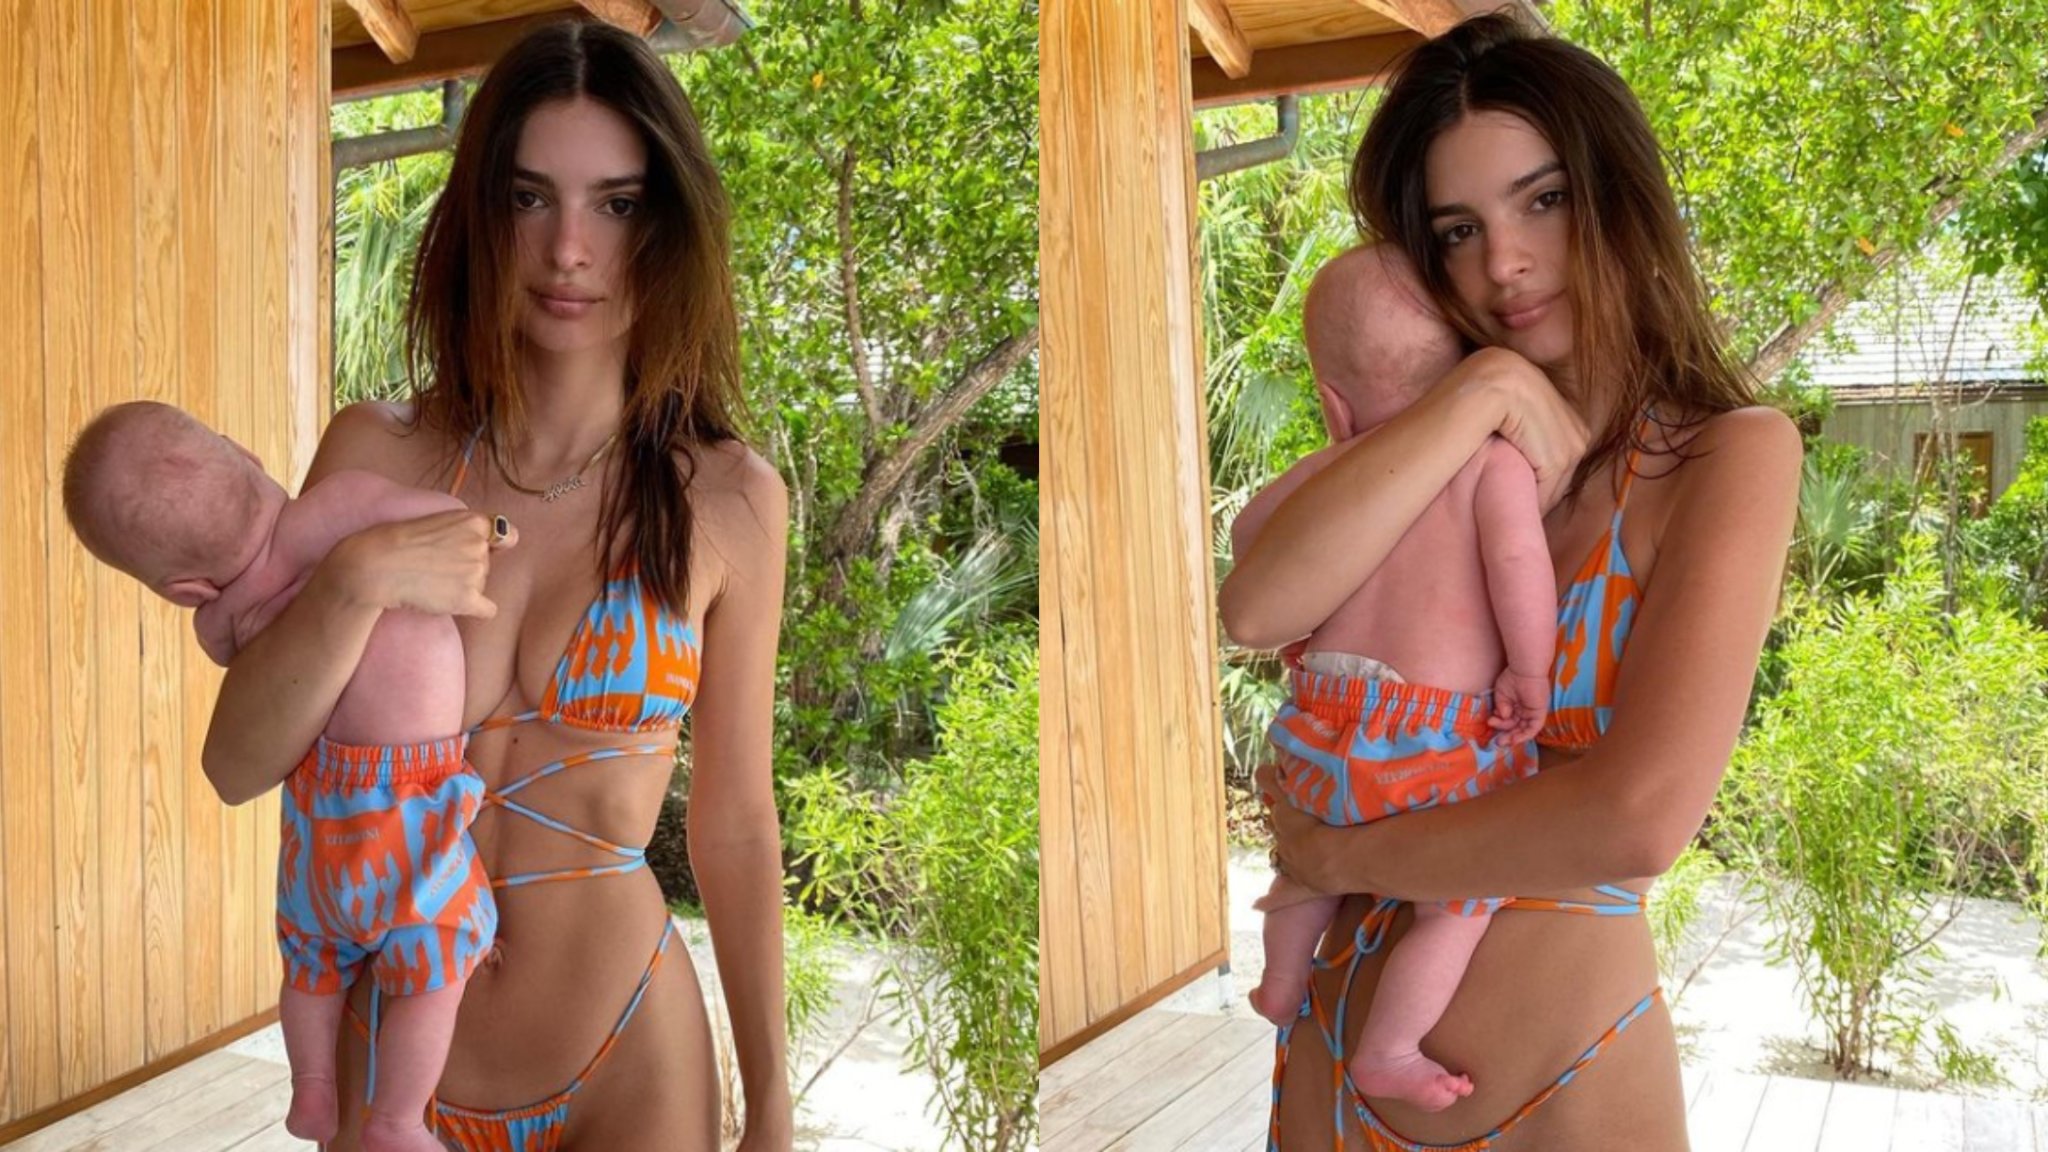 Emily Ratajkowski's baby photo and five more out-of-bounds mom-shaming moments - cover